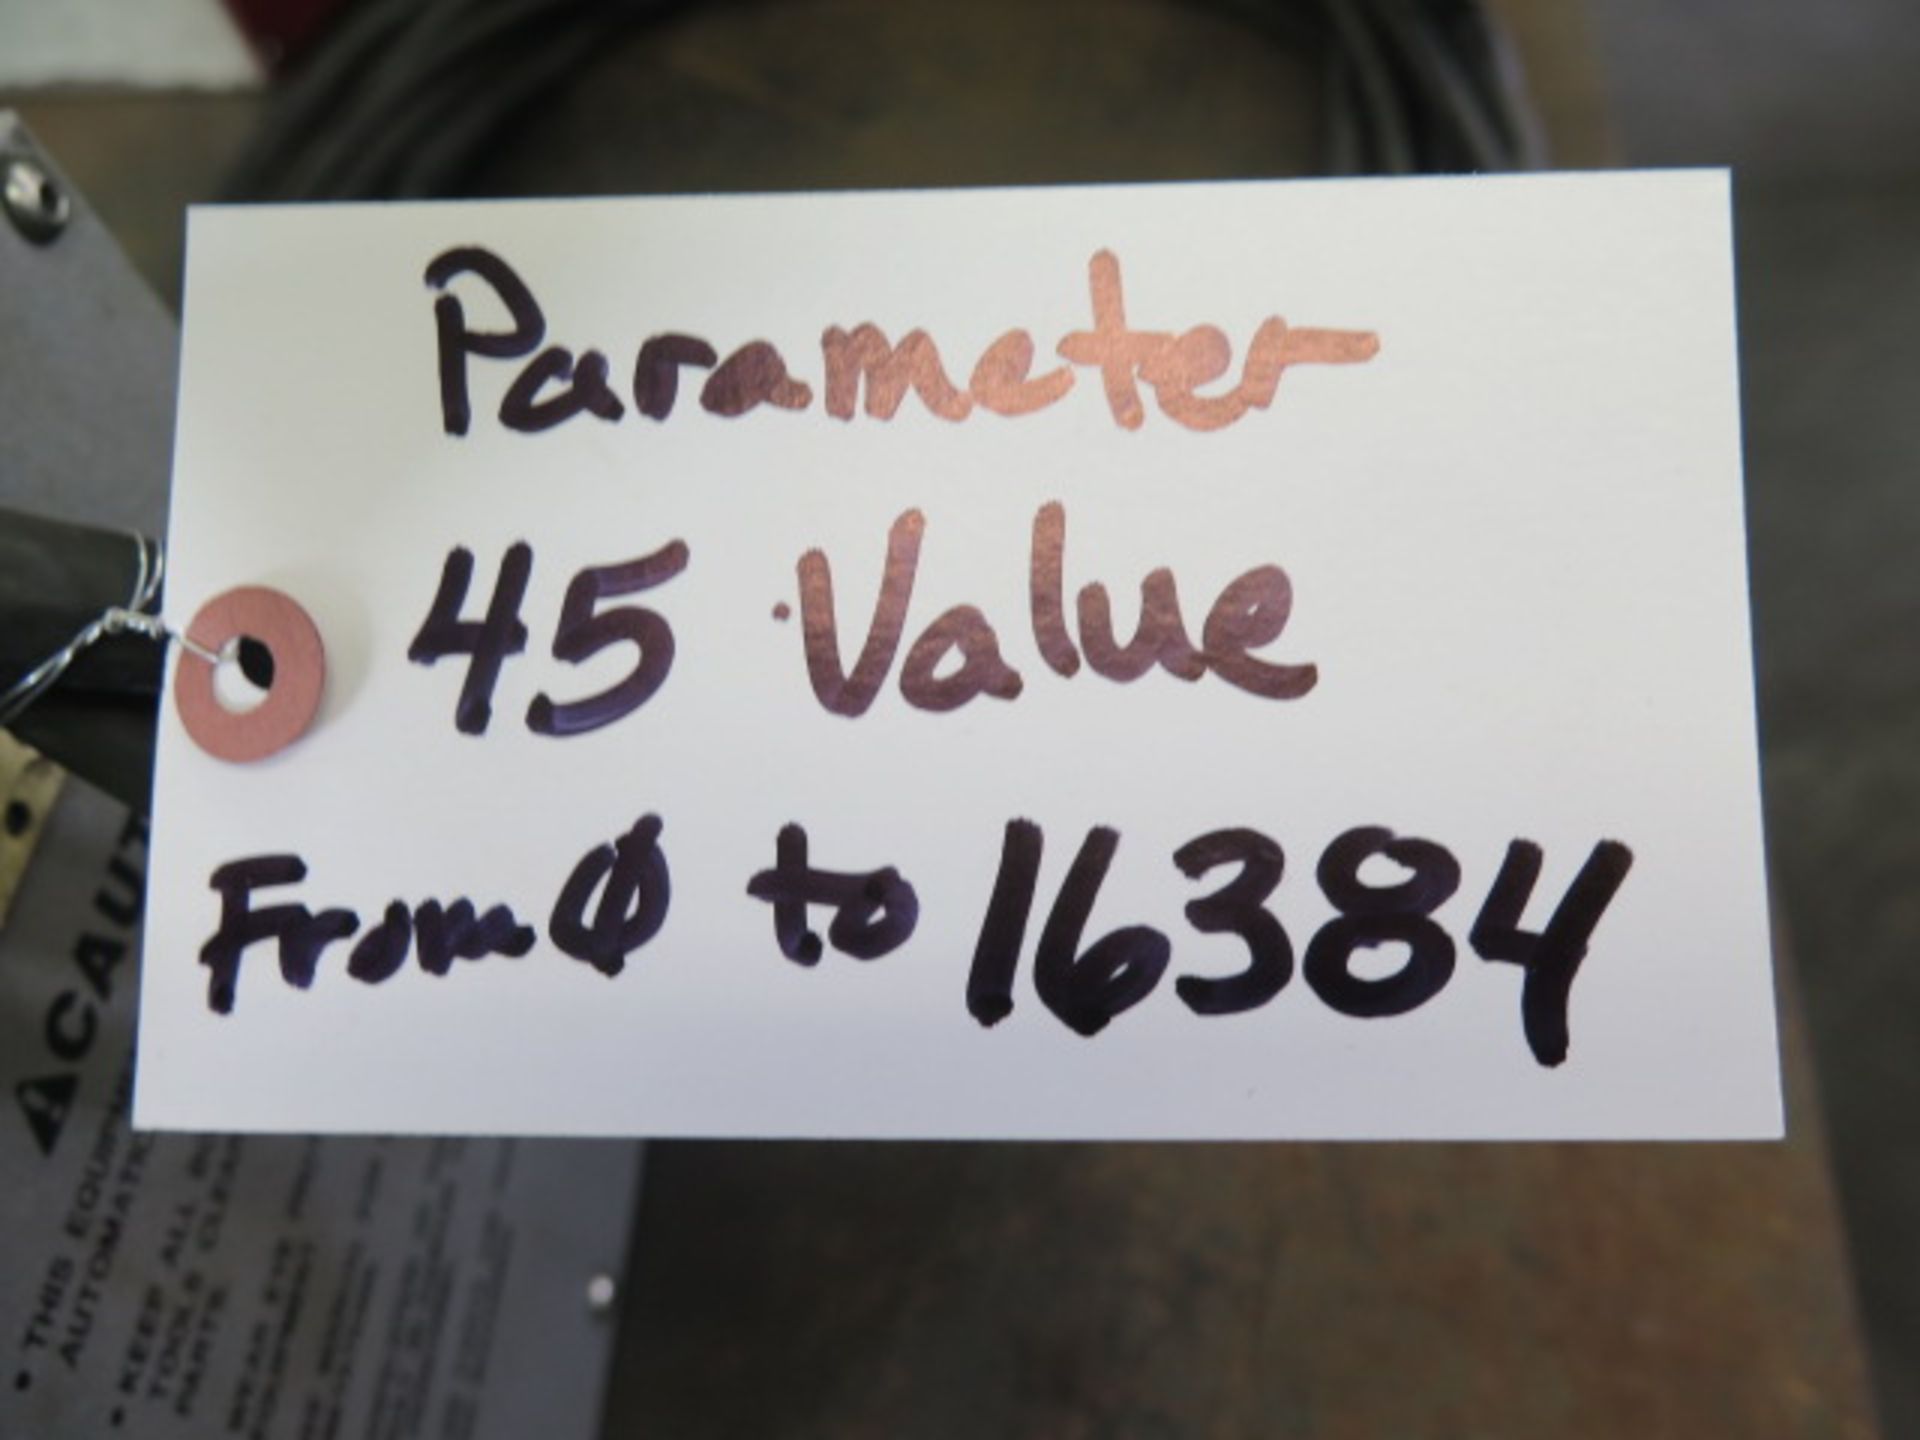 Haas HRT160 6” 4th Axis Rotary Indexer s/n 162345 ( Parameter #45 VALUE from “0” to “16384”) - Image 8 of 9